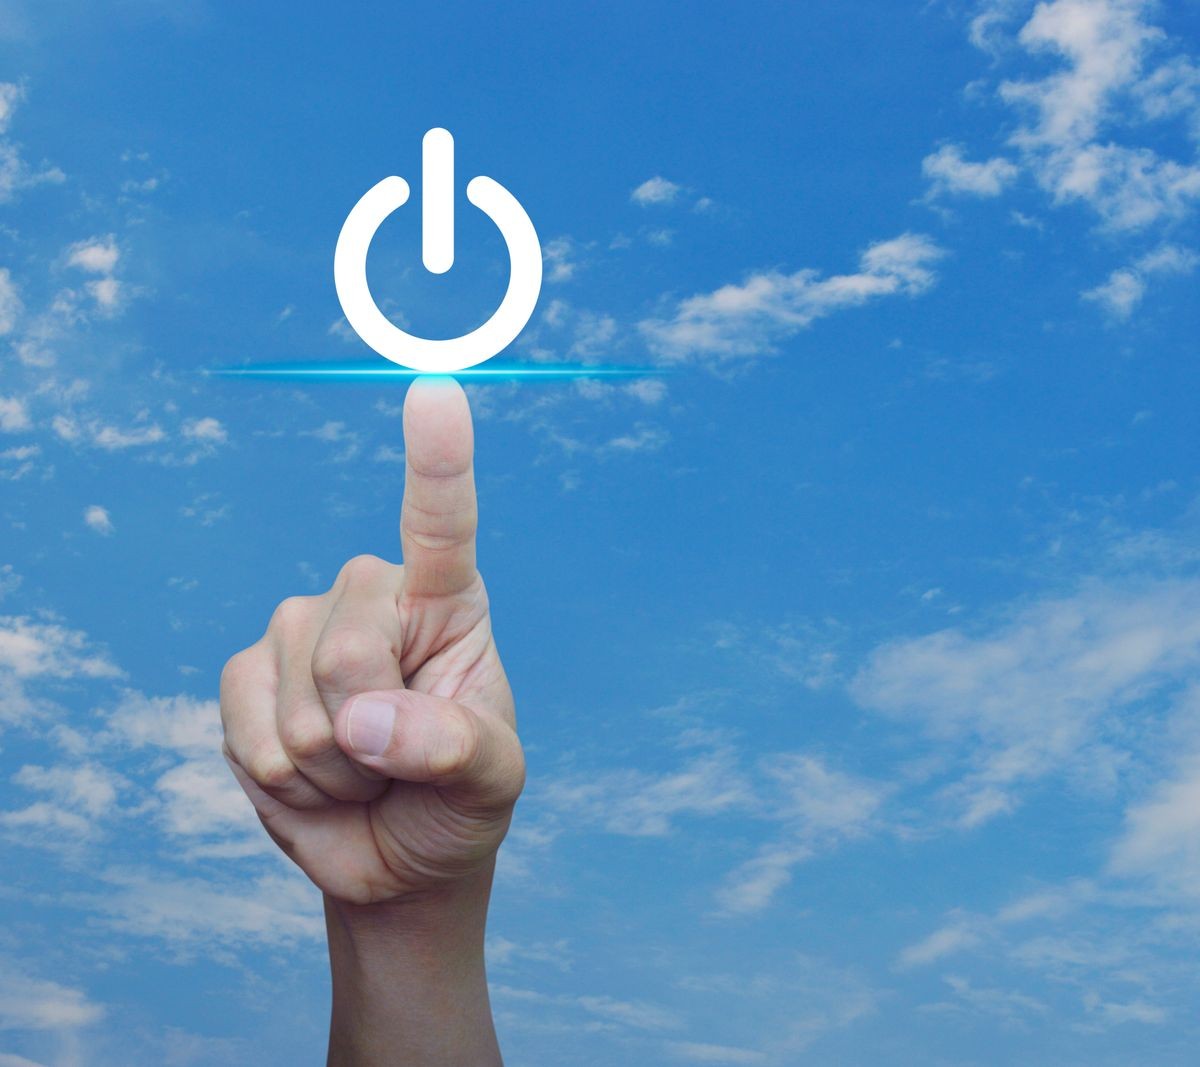 Hand pressing power button over blue sky with white clouds, Start up business, industry concept